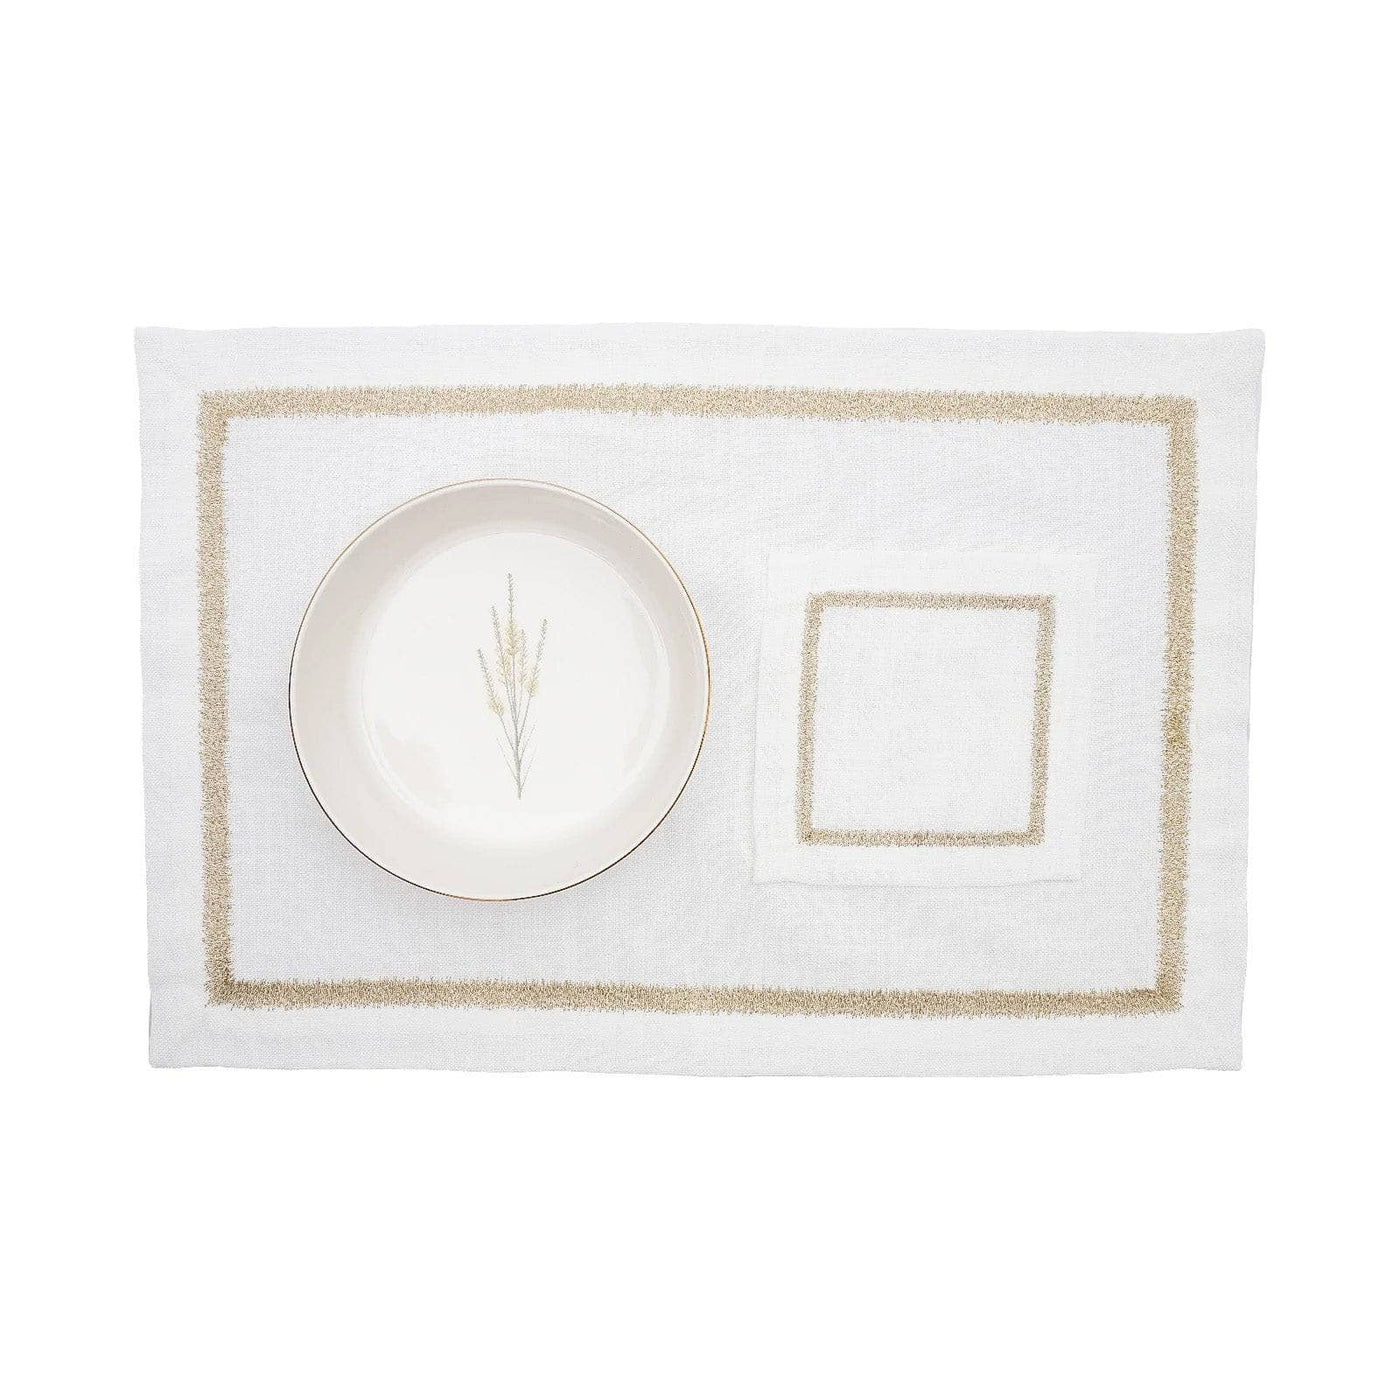 Evelyn Set of 2 Embroidered Placemat and Coaster Set, Gold 5